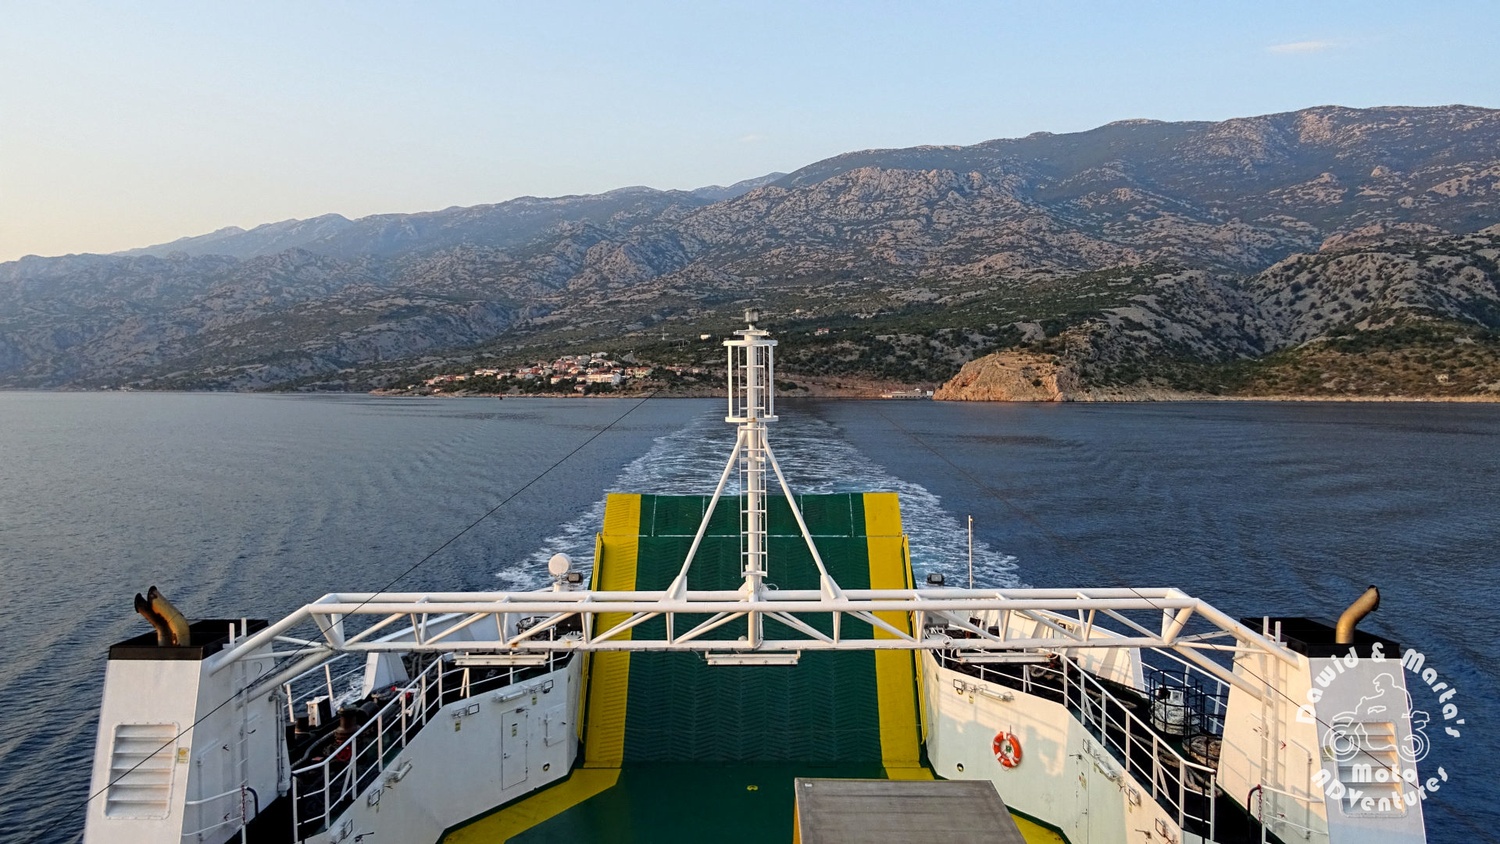 View from the ferry on the Prizna coast - getting to the Pag Island